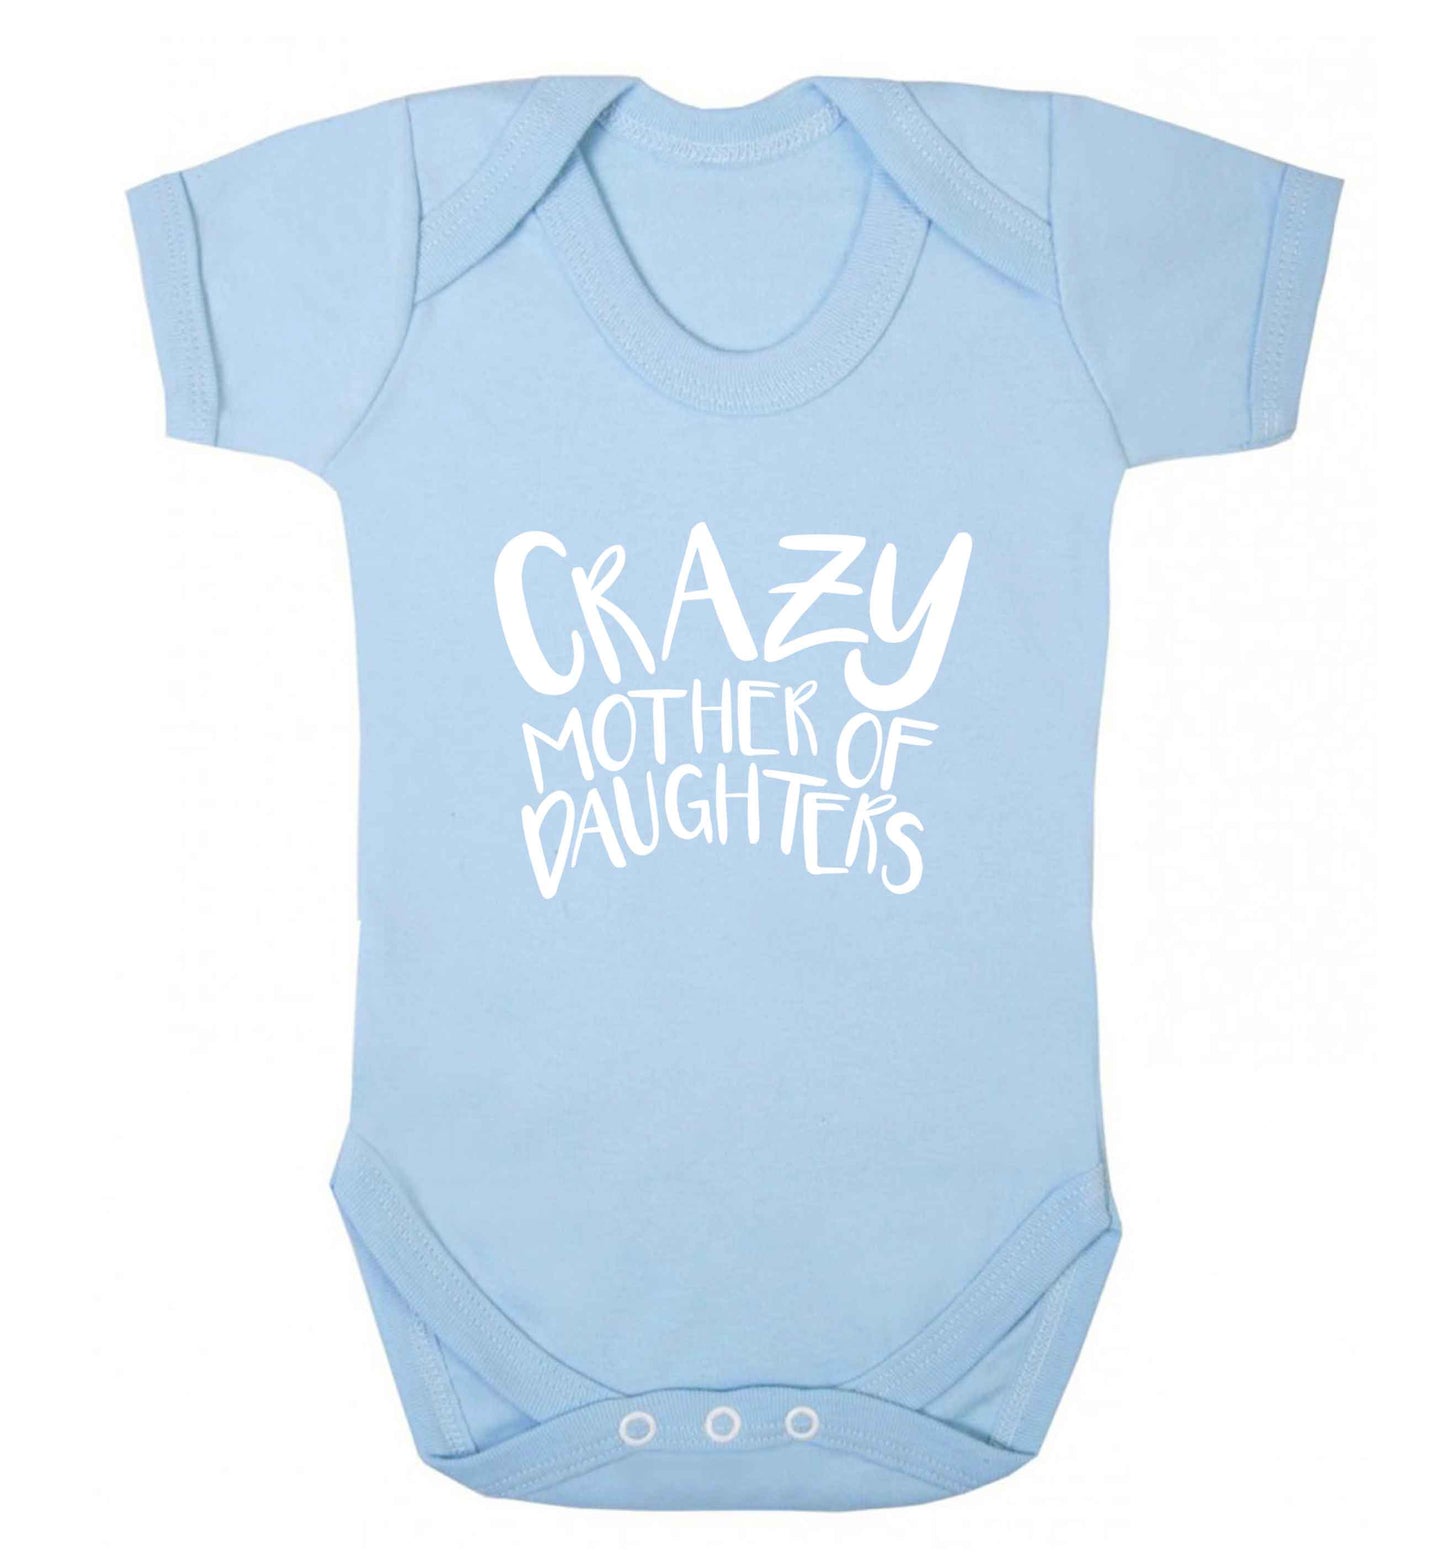 Crazy mother of daughters baby vest pale blue 18-24 months